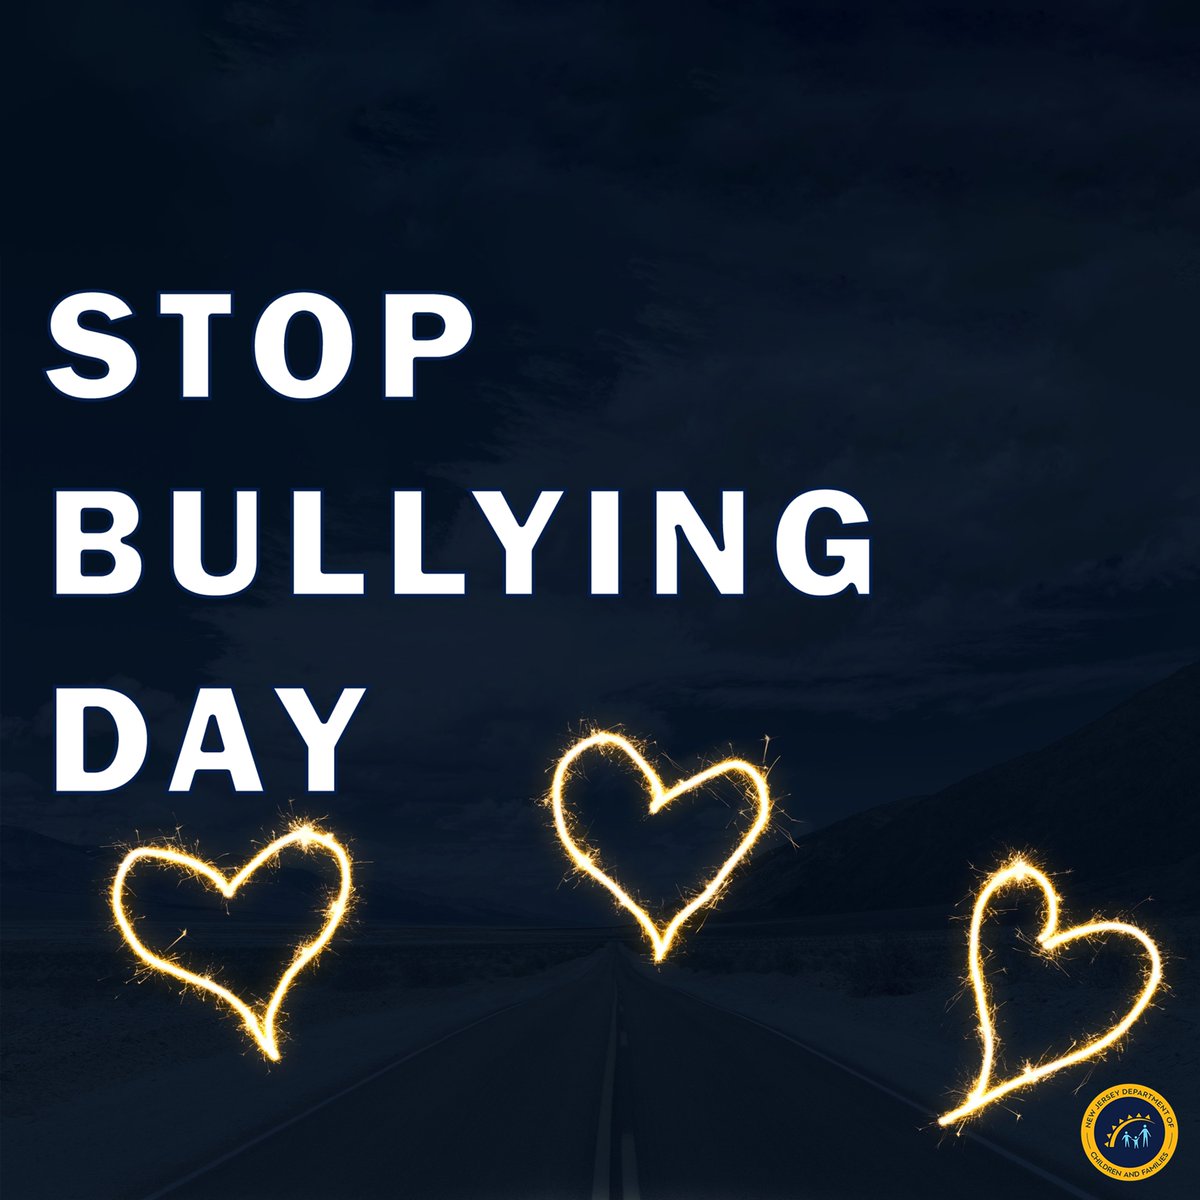 #TeamDCF is committed to preventing and ending bullying.
 
Bullying harms our youth physically and emotionally, and sometimes causes lifelong negative effects.
 
We promise to support survivors, and do our part to promote kindness and empathy.